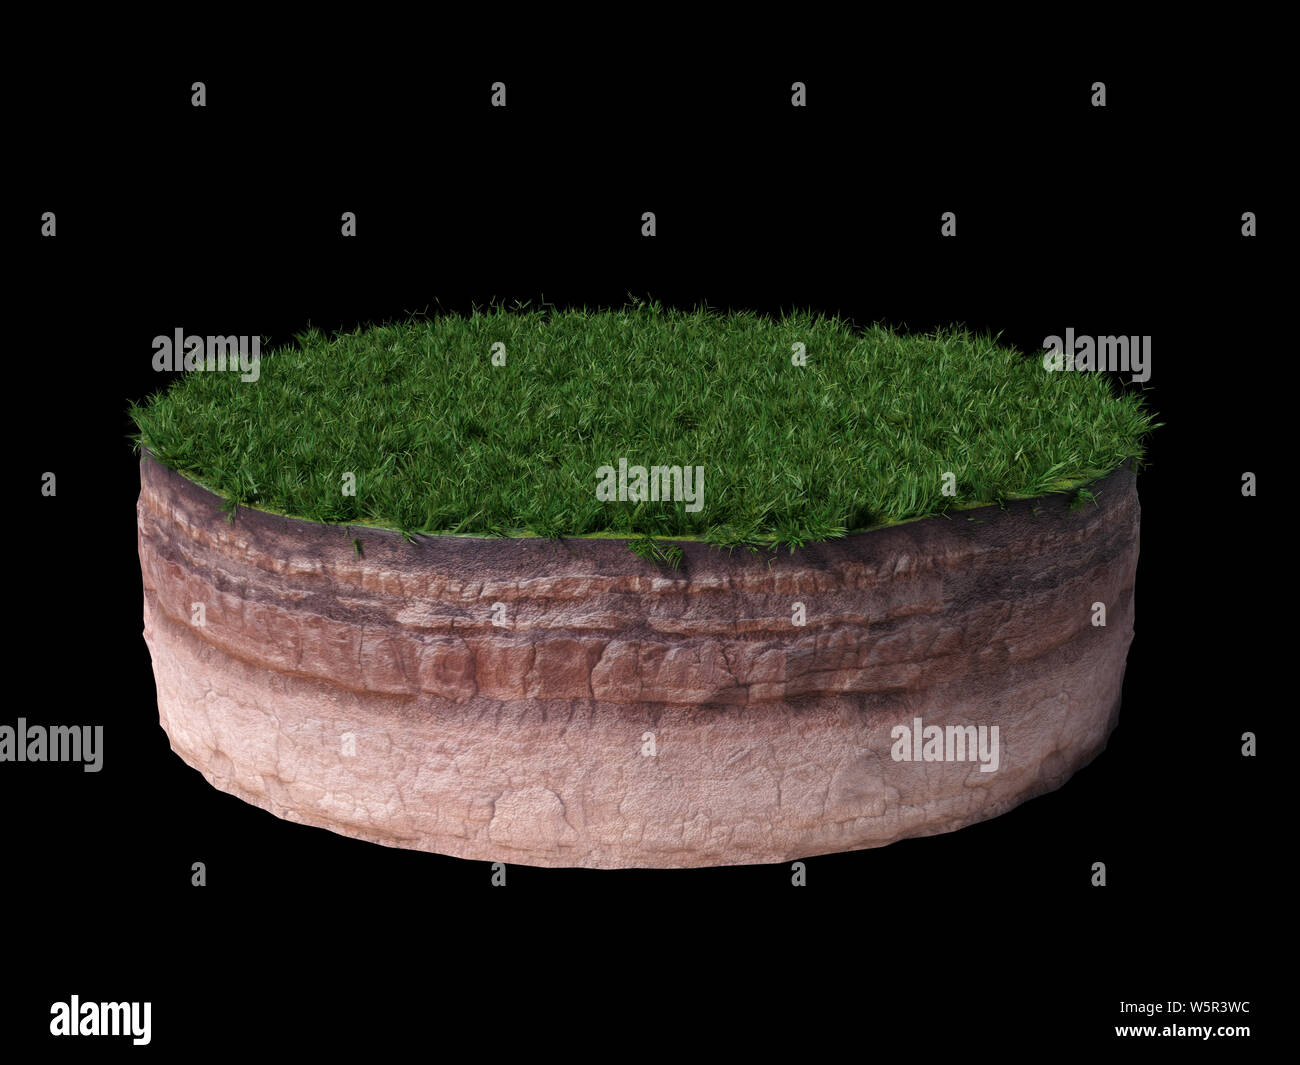 model of a cross section of ground with grass on the surface (3d render, isolated on black background) Stock Photo